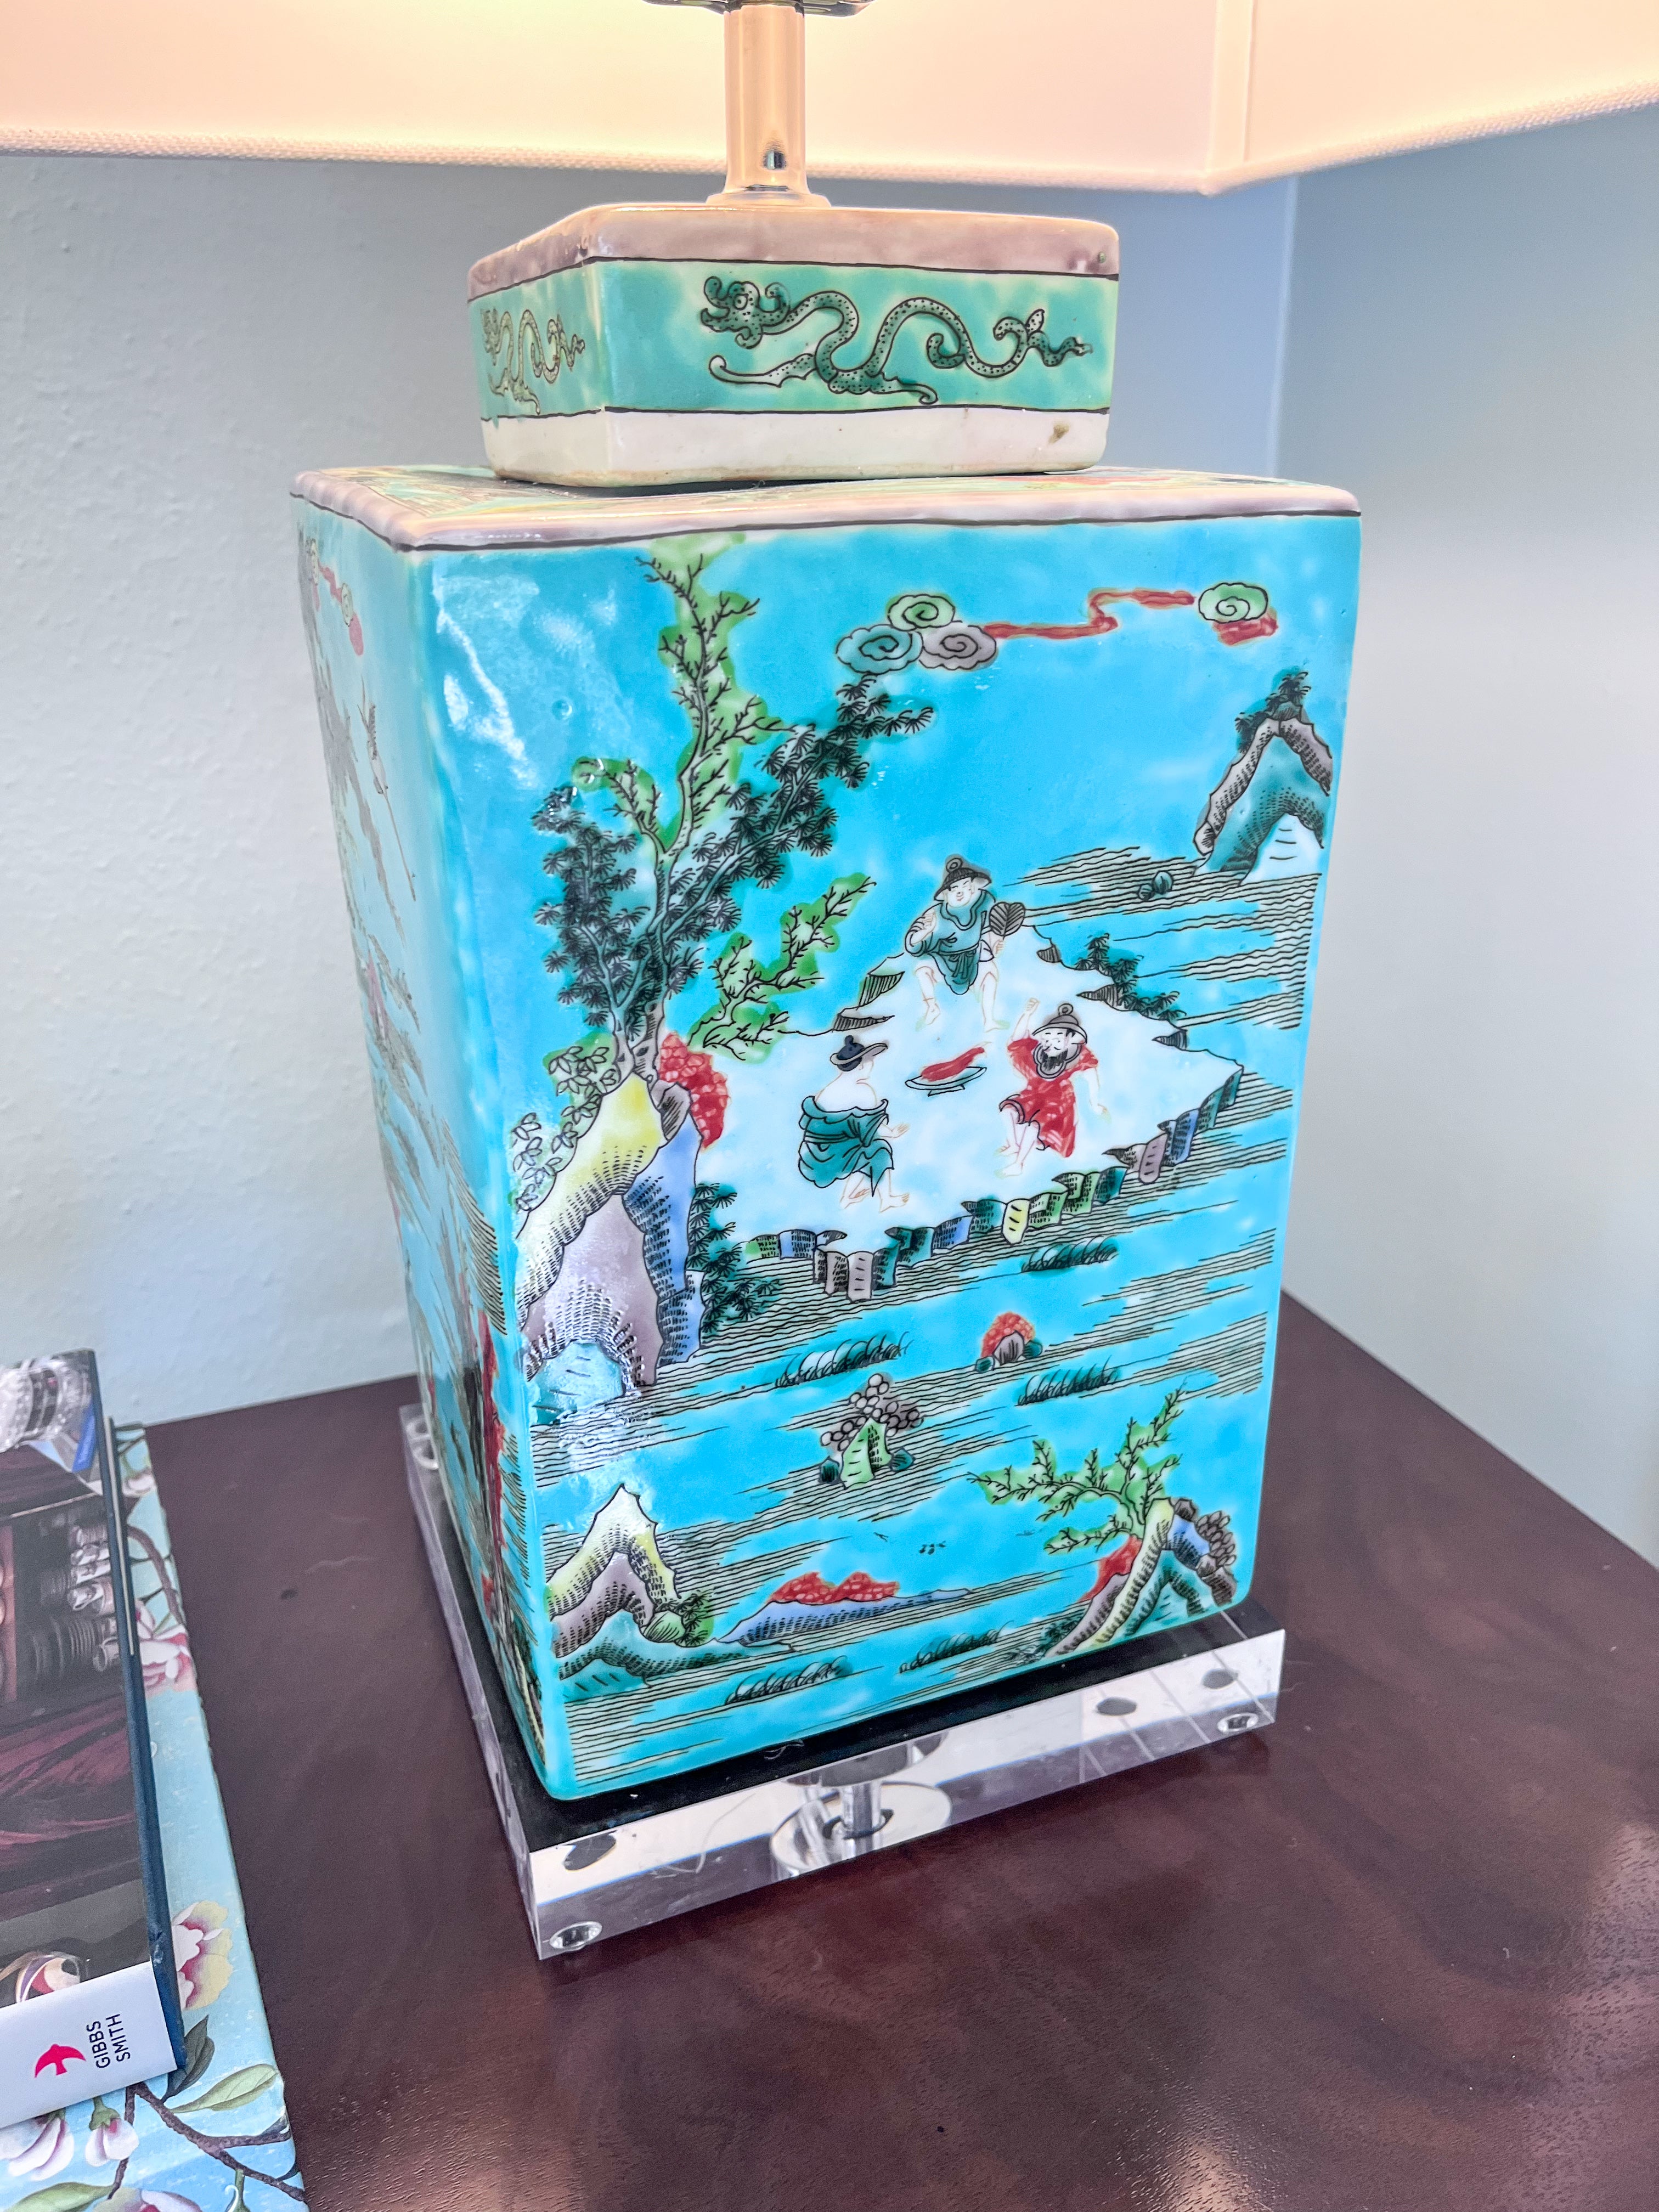 Chinoiserie Green Landscape Lamp - Local Pickup Only